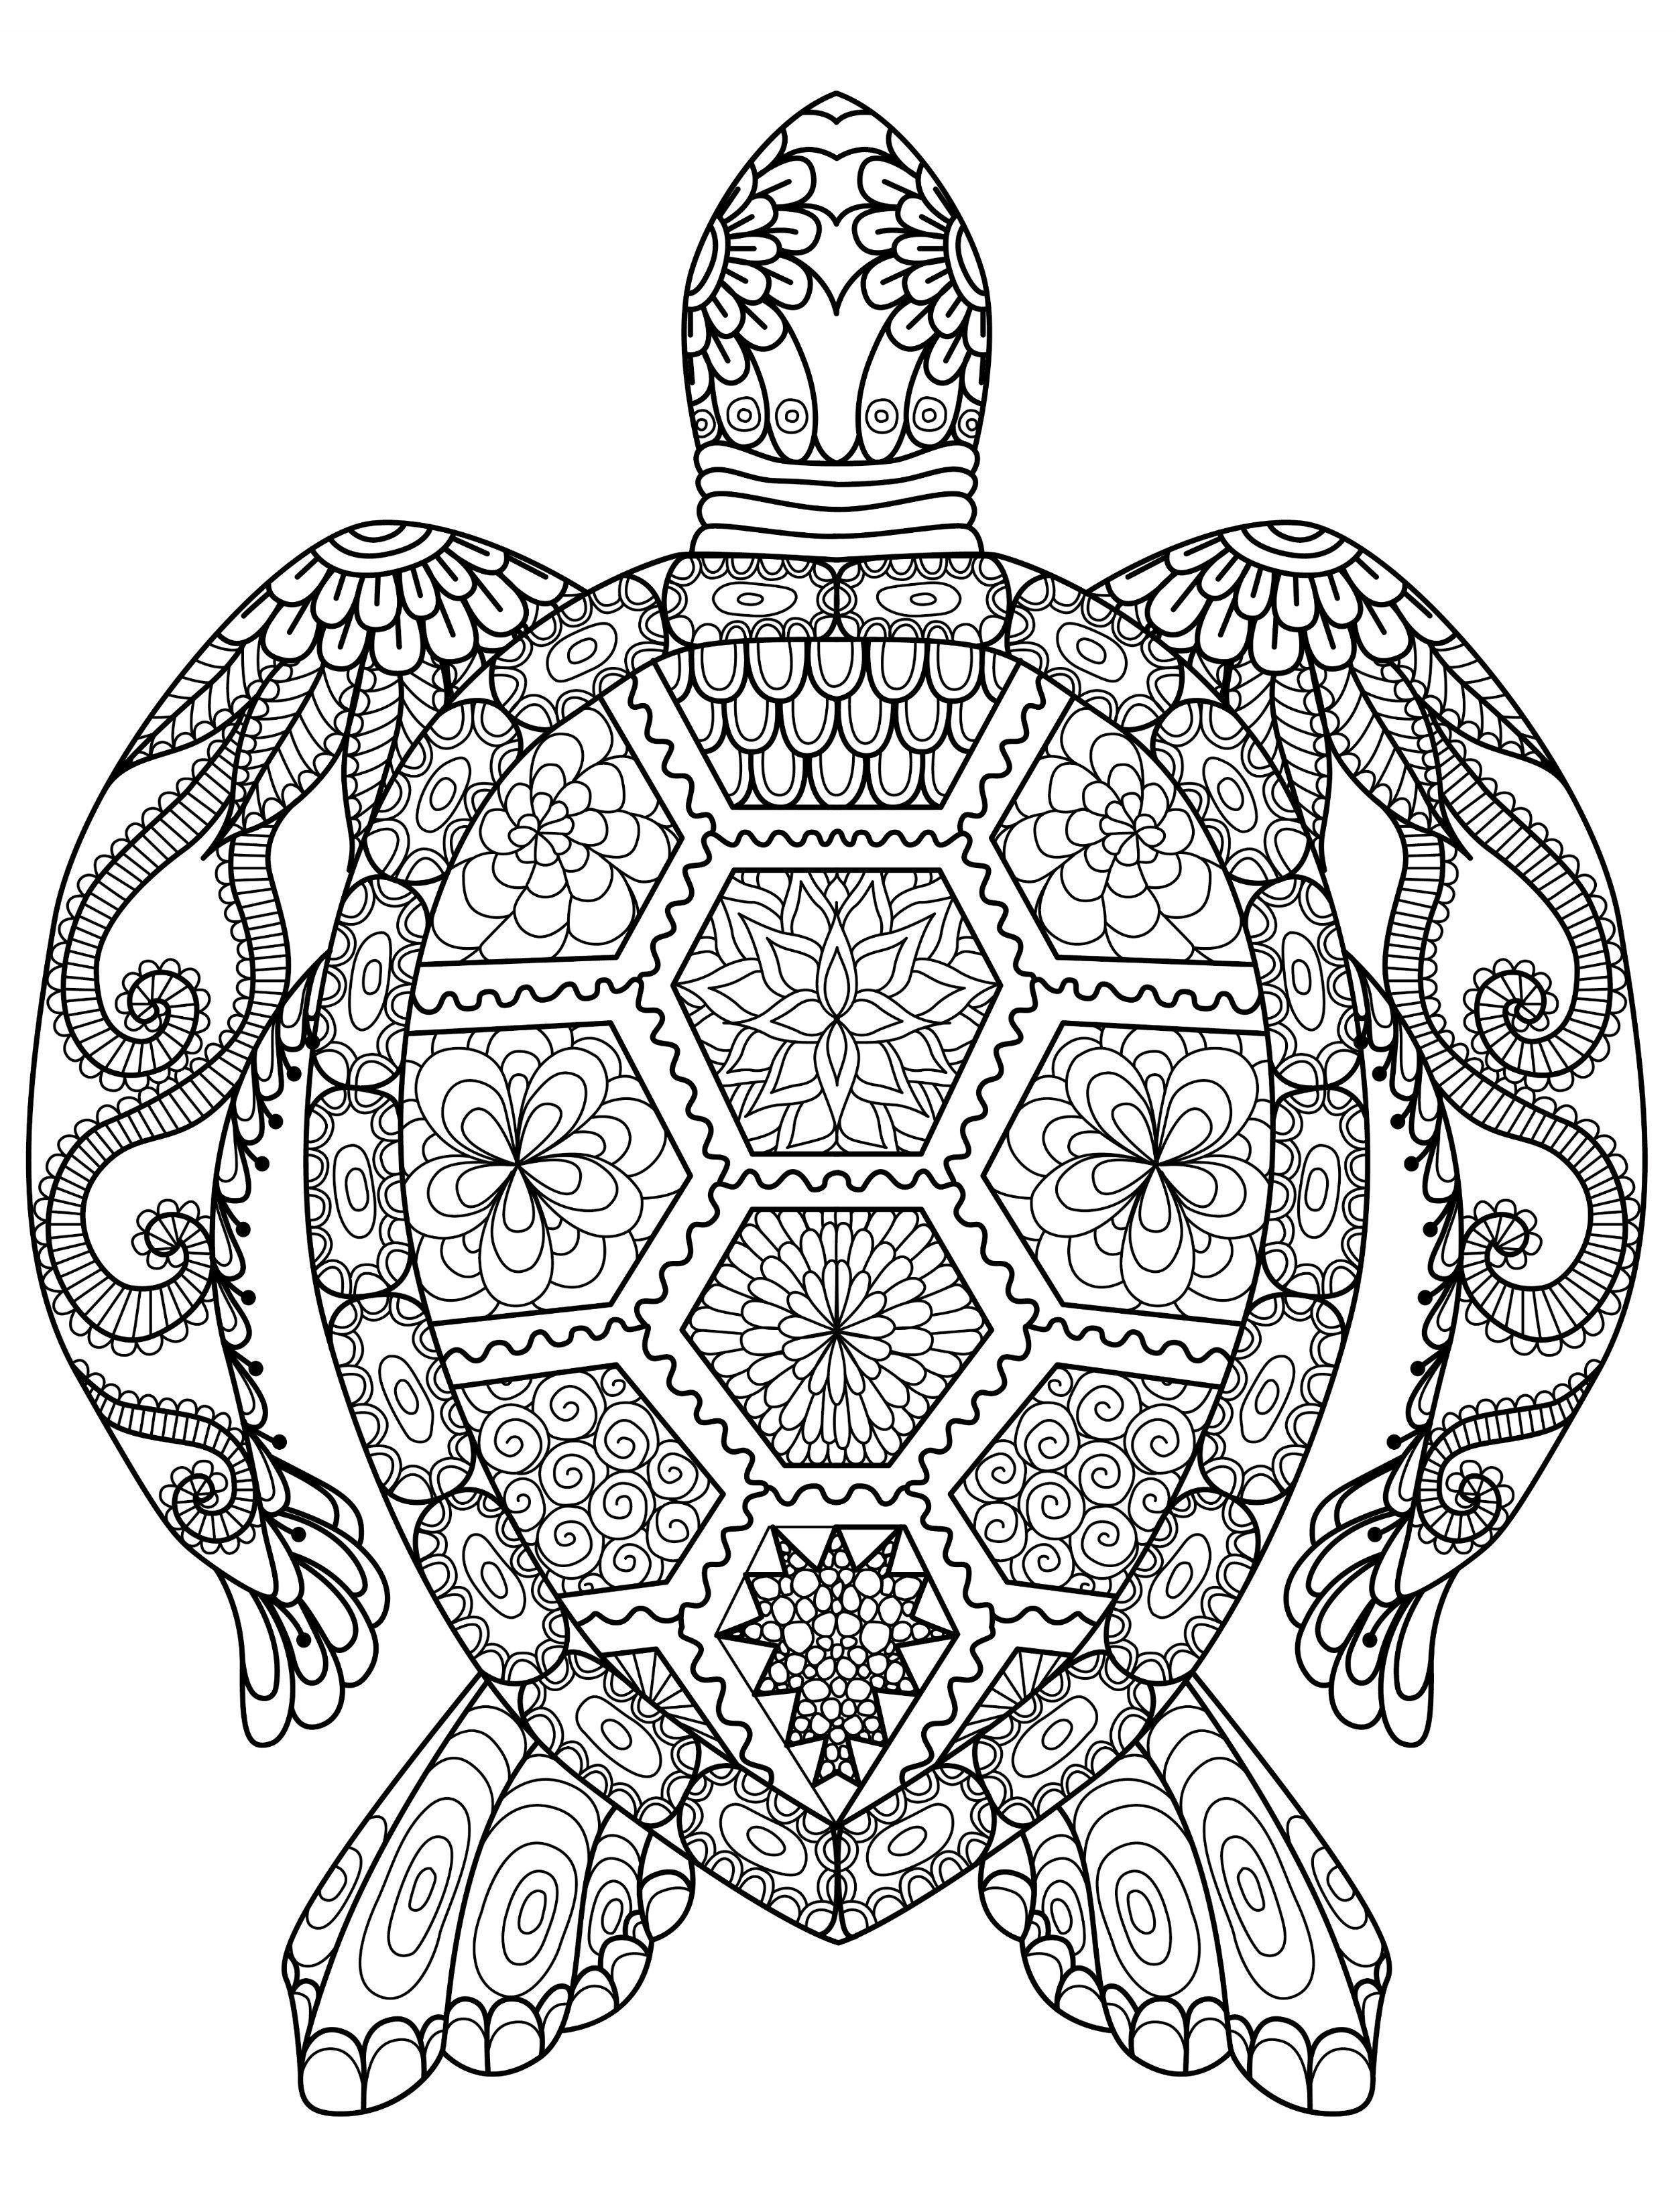 Animal mandala coloring pages â through the thousand images on the web with regarâ turtle coloring pages free printable coloring pages free adult coloring pages